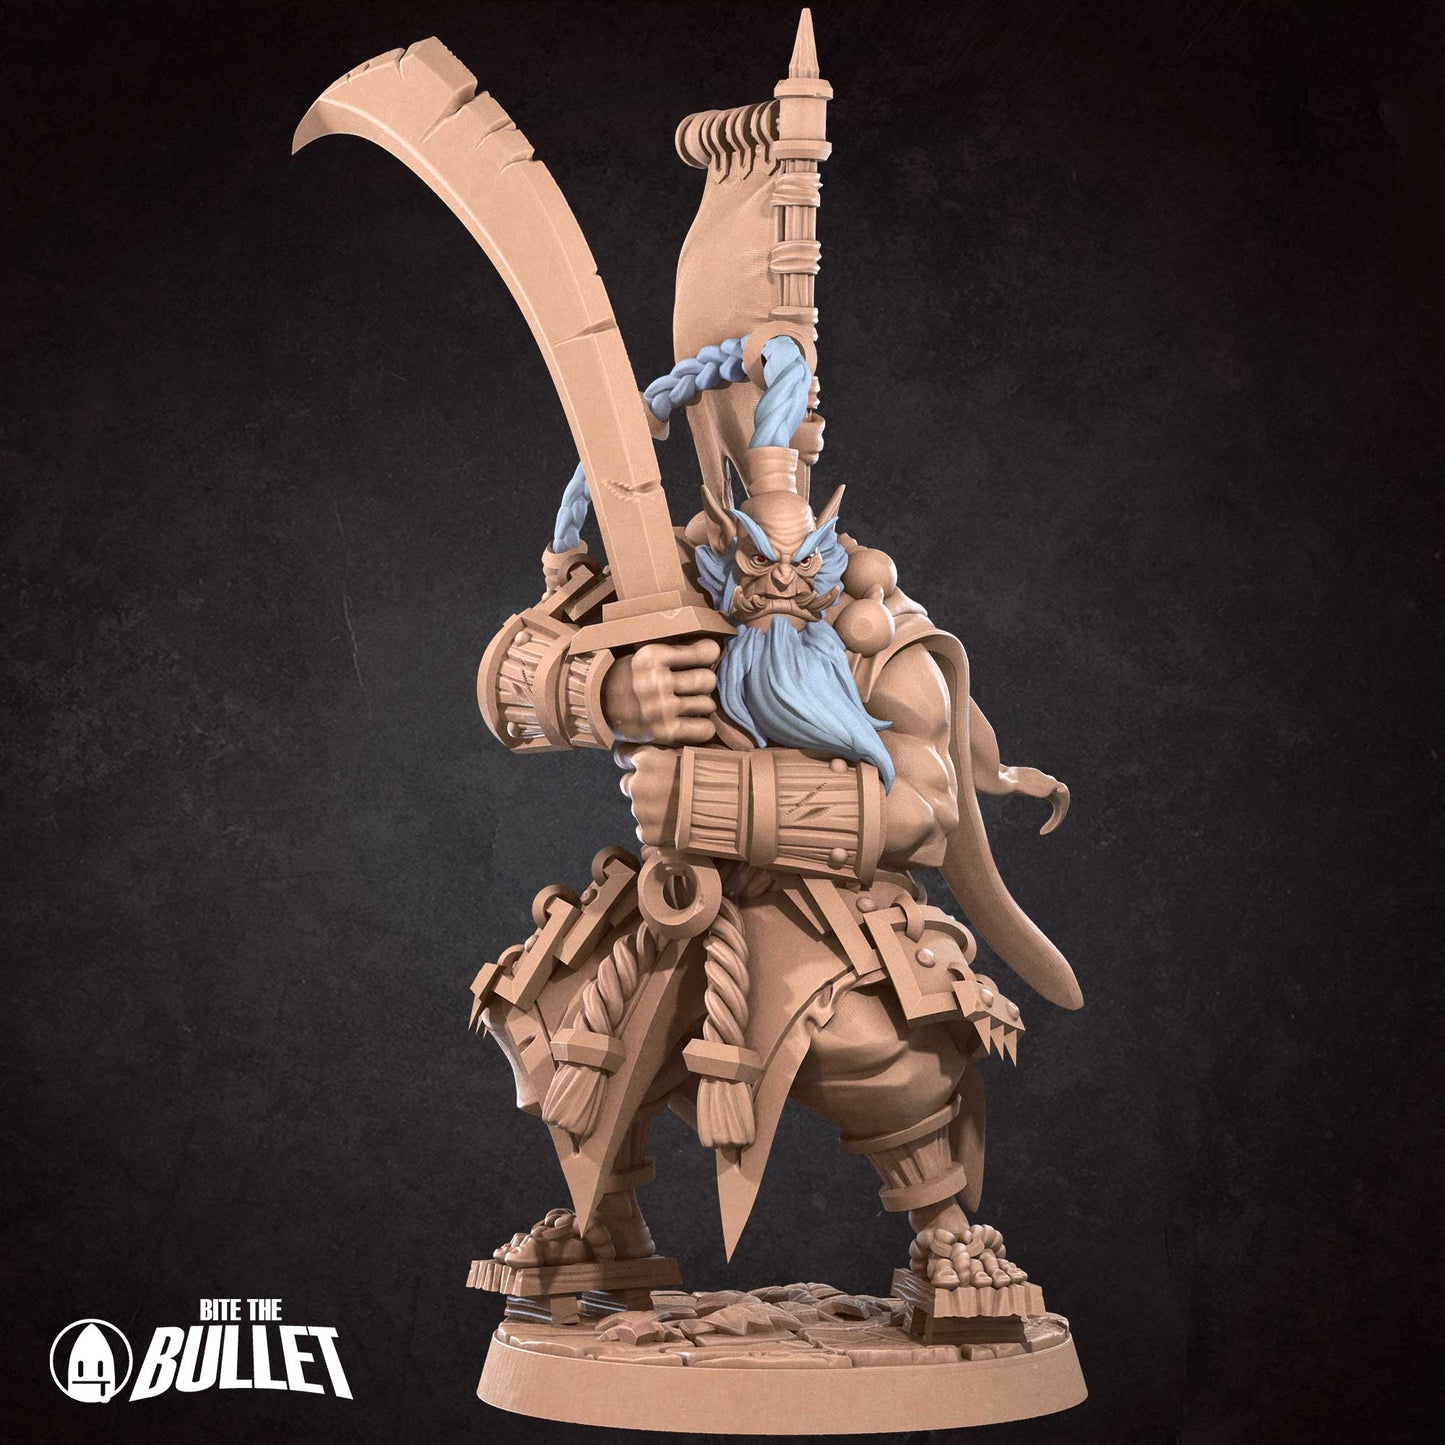 DnD Barbarian - Fighter - Miniature - Orc - Paladin Thrakka  Barbarian - Fighter - Miniature - Orc - Paladin sold by DoubleHitShop